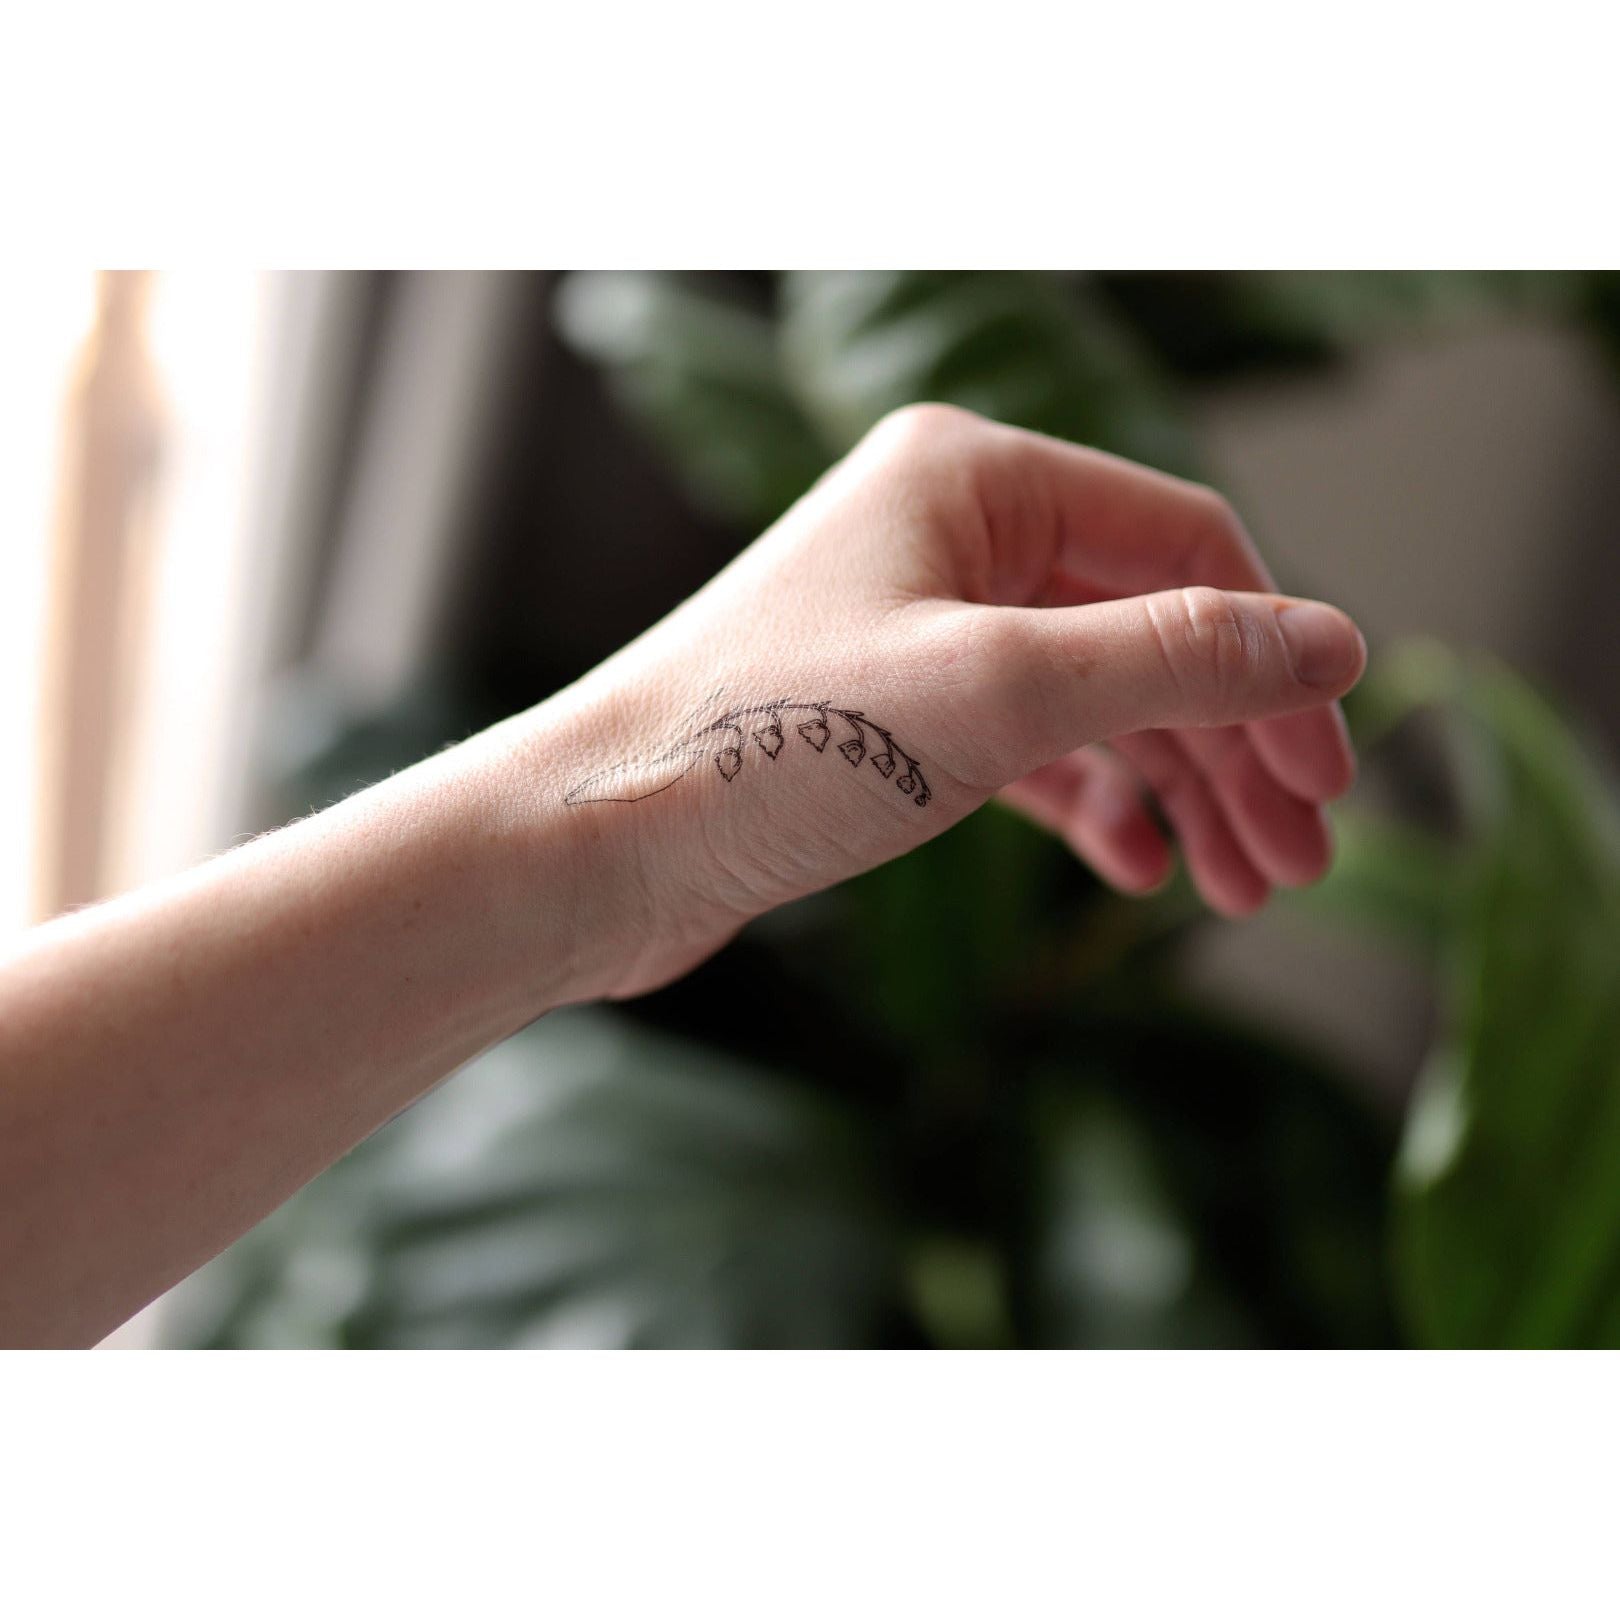 300+ Dreamy Zodiac Tattoos For Each Sign - Our Mindful Life